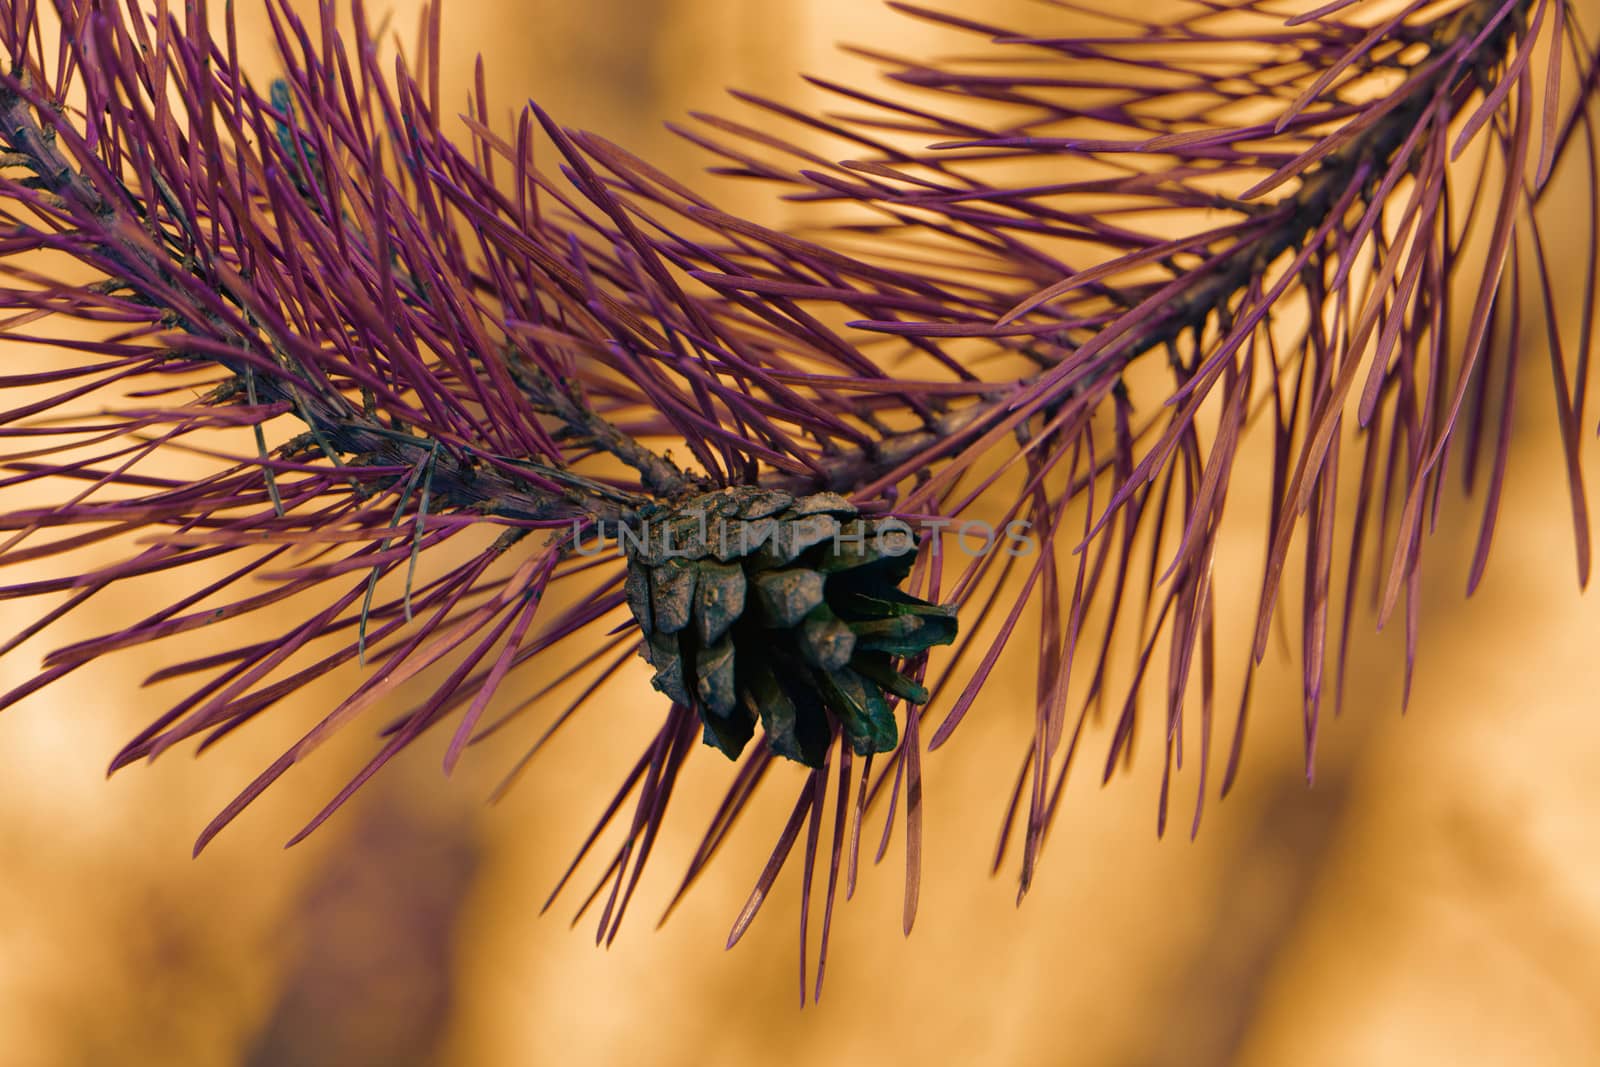 pine cone, on pine branch